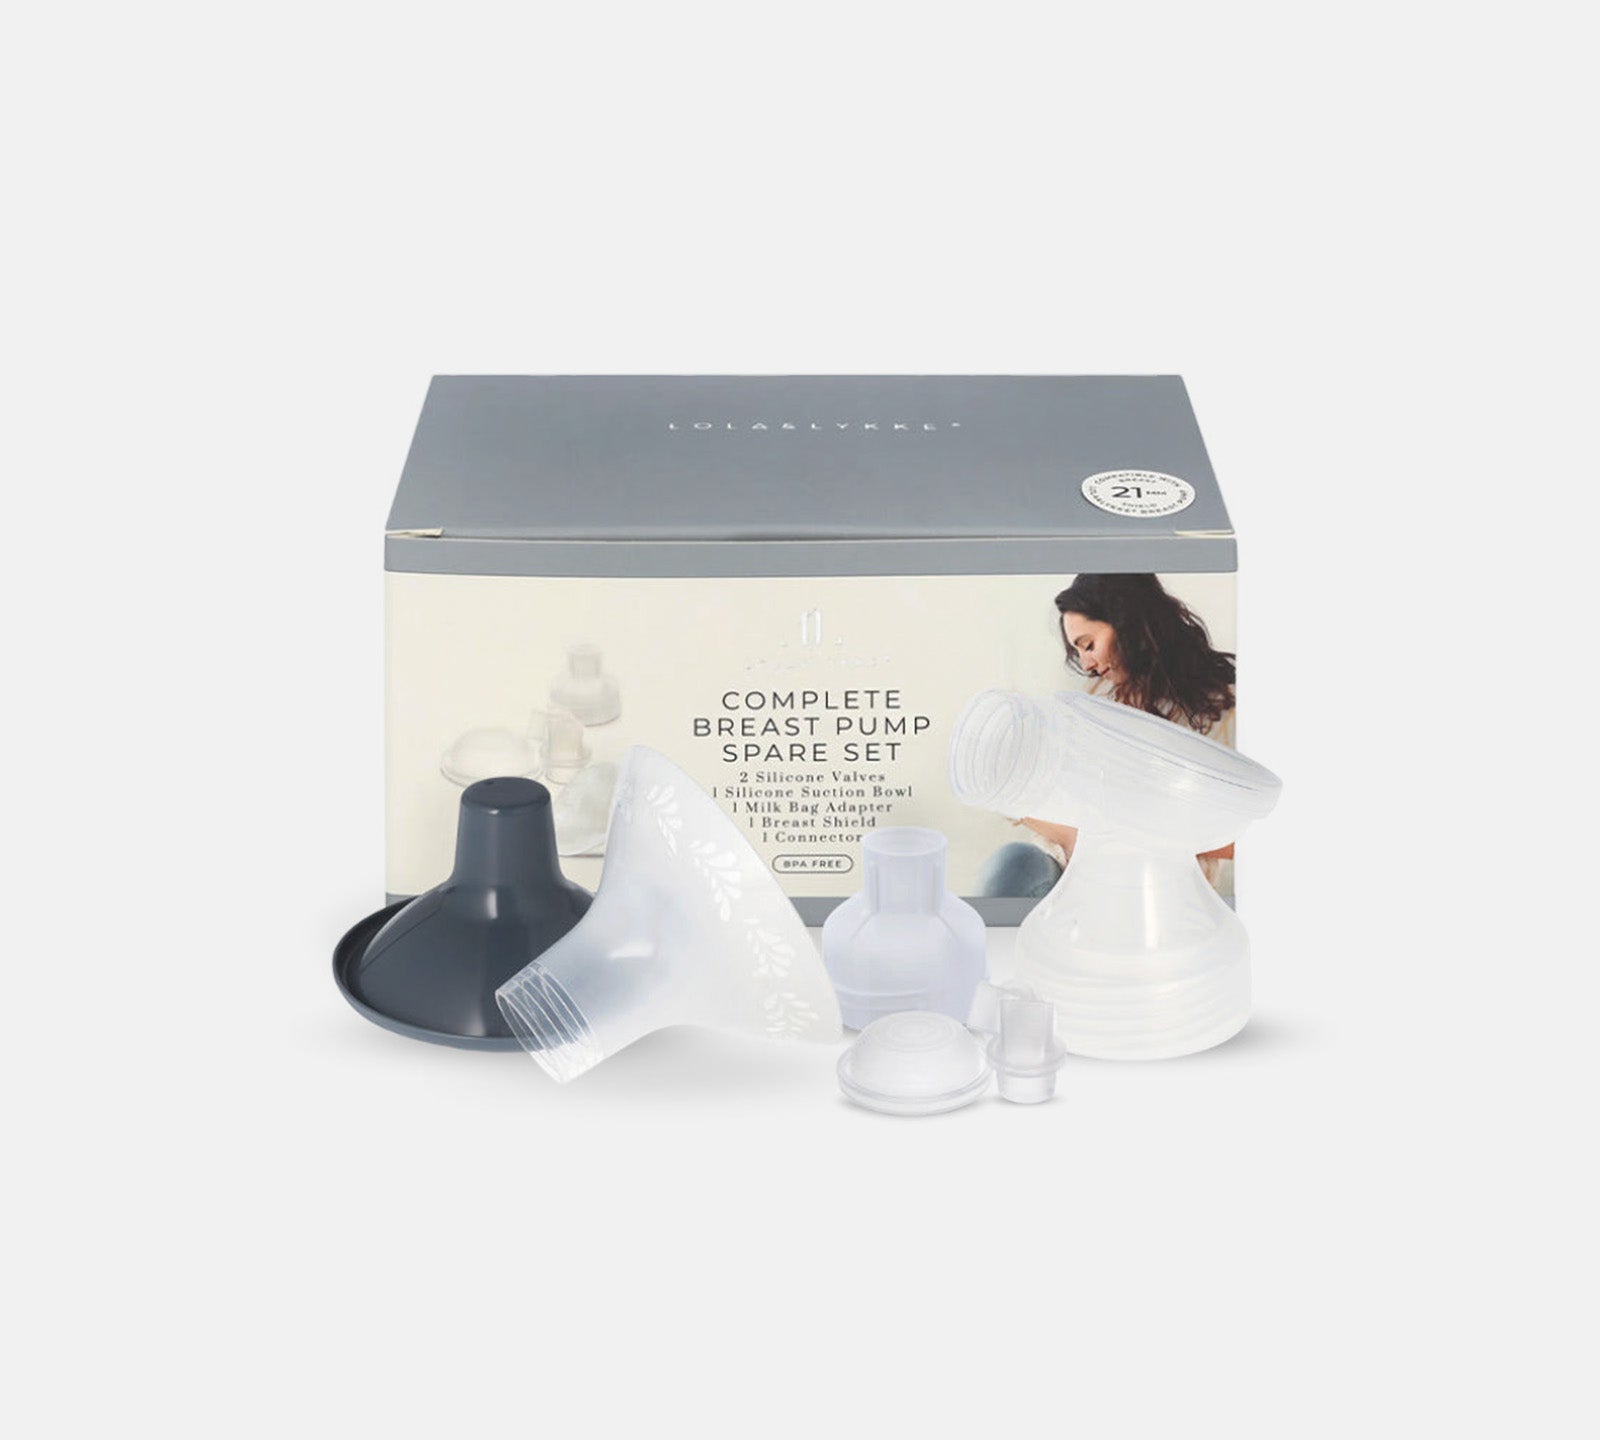 Complete Breast Pump Spare Set For Lola&Lykke Smart Electric Breast Pump 21mm